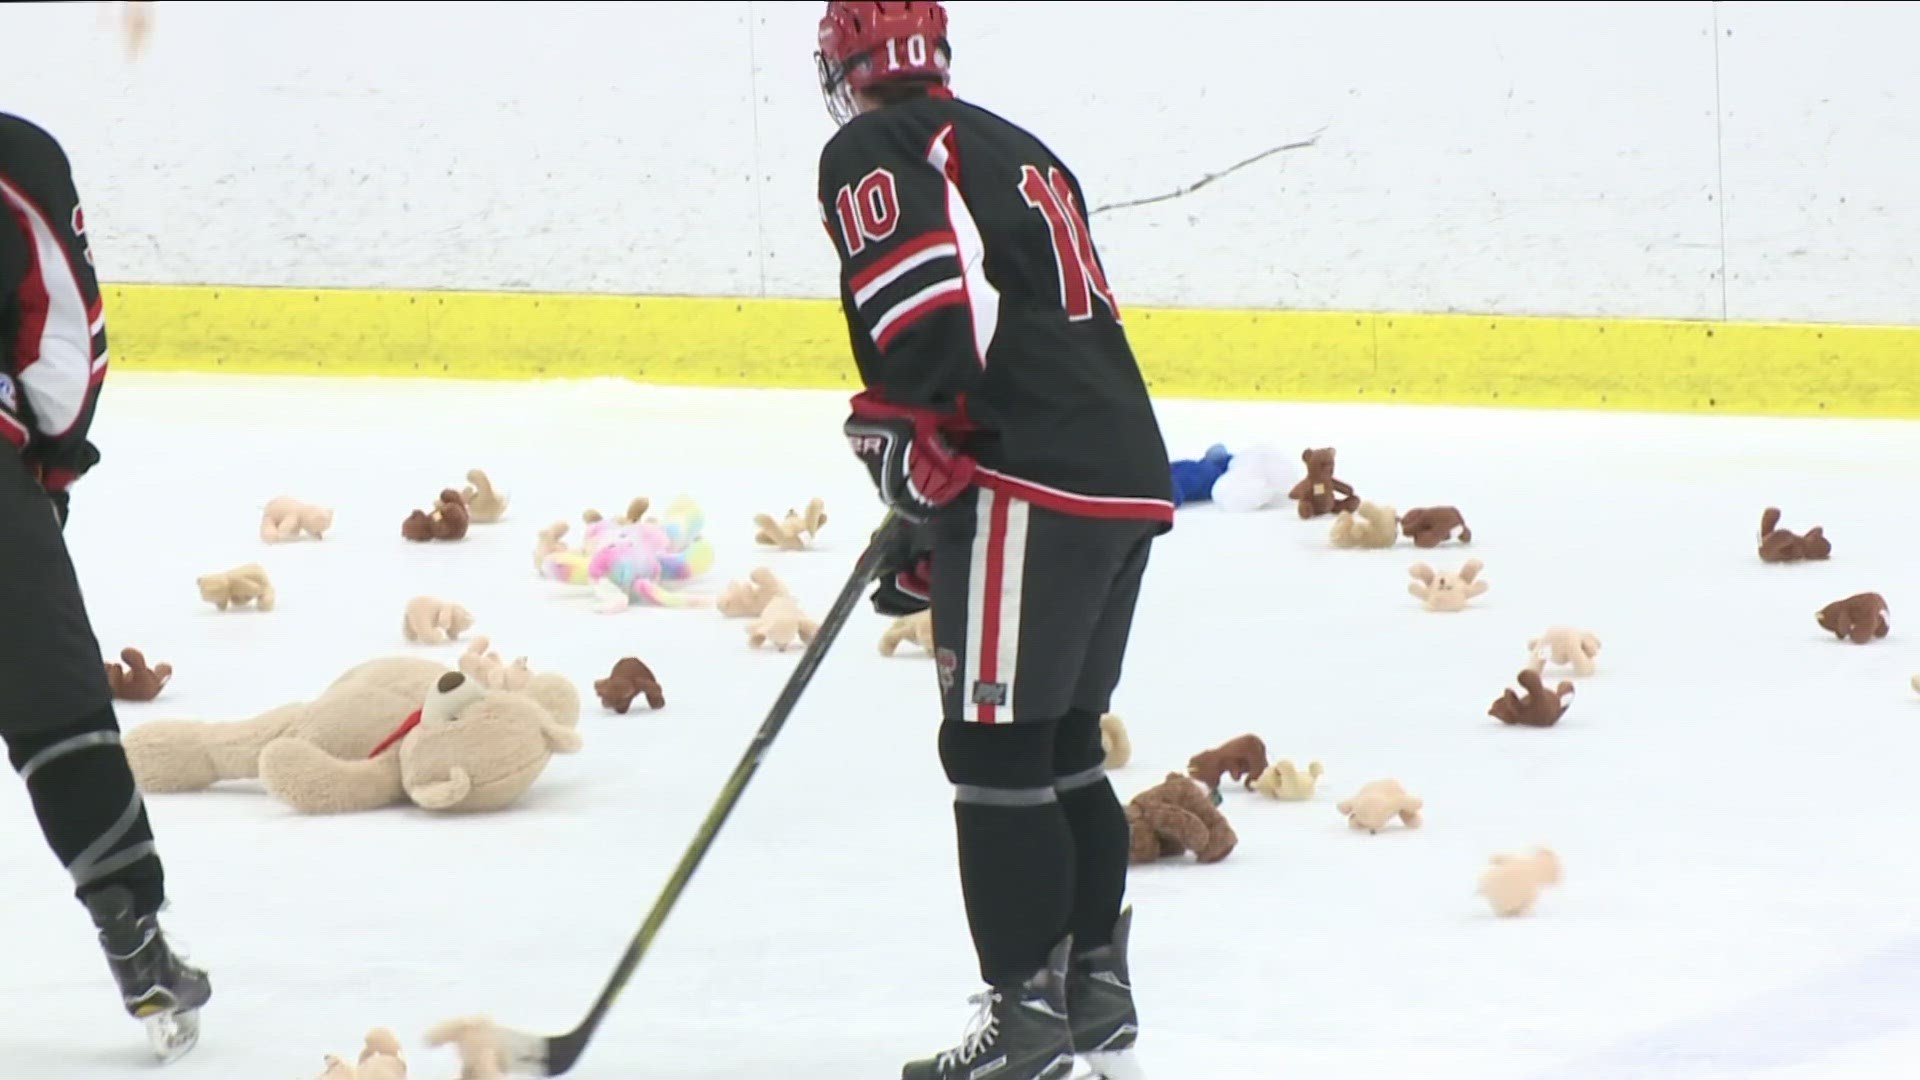 The Williamsville North Fed Hockey Team IS HOLDING its 7-th Annual Teddy Bear Toss DURING THEIR MATCHUP WITH Williamsville South.